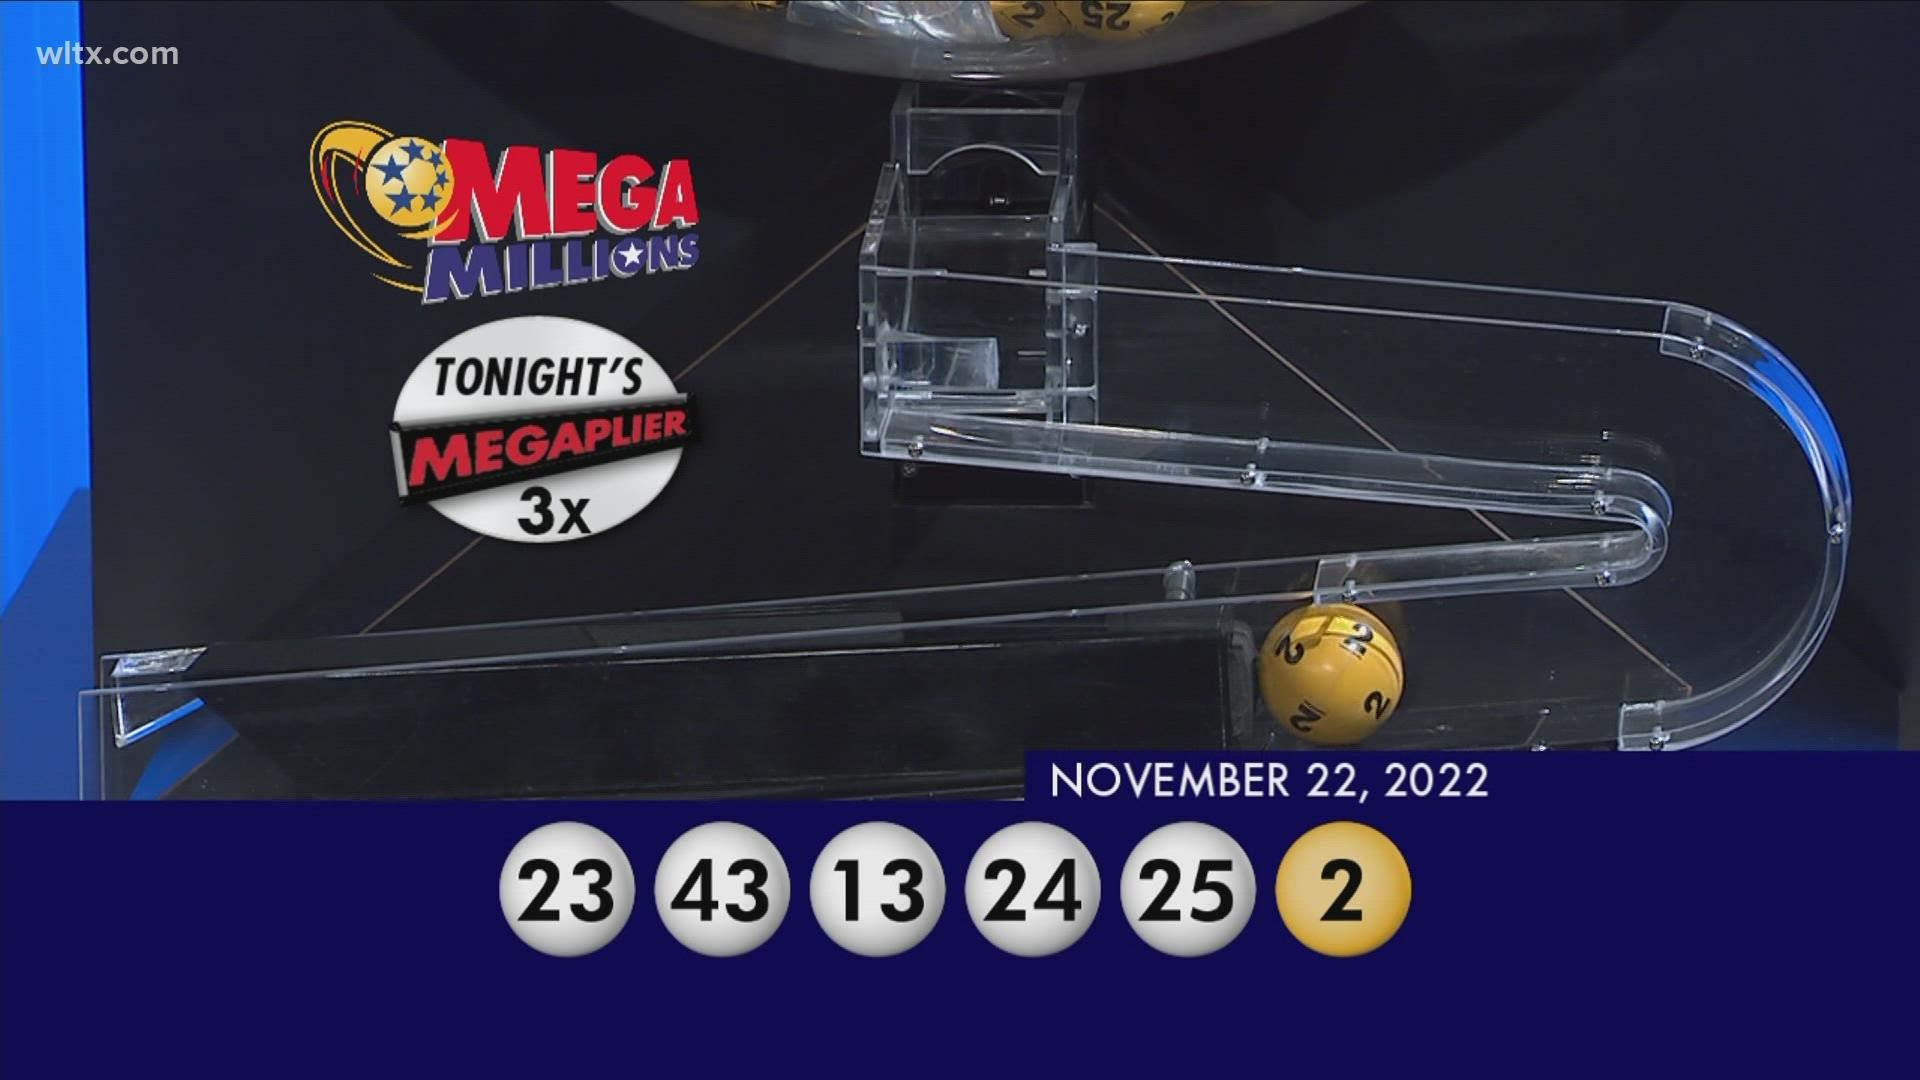 Here are the winning MegaMillion lottery numbers for November 22, 2022.